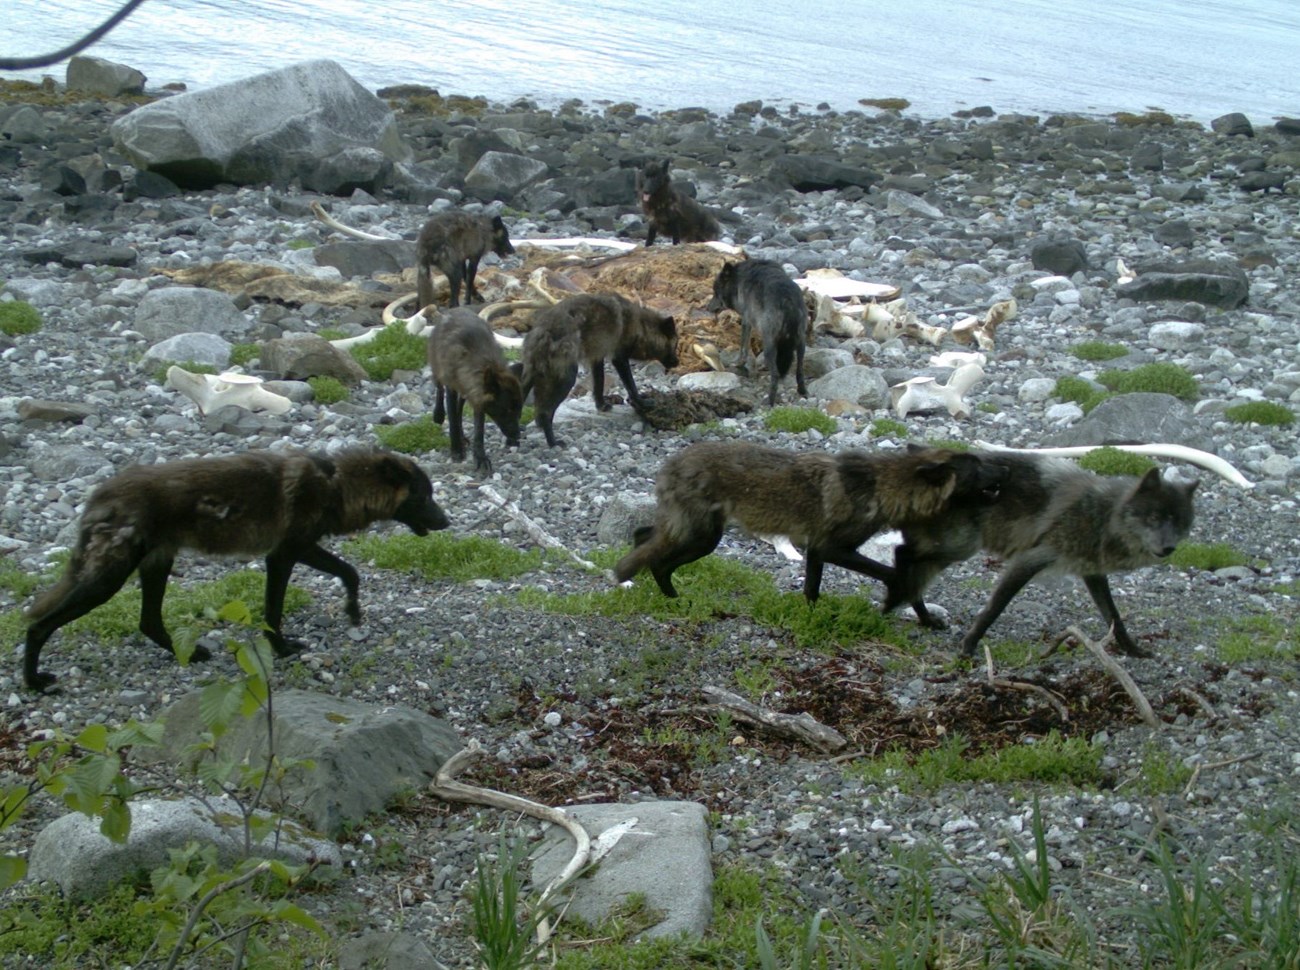 Pack of 8 wolves near the remains of a whale carcass